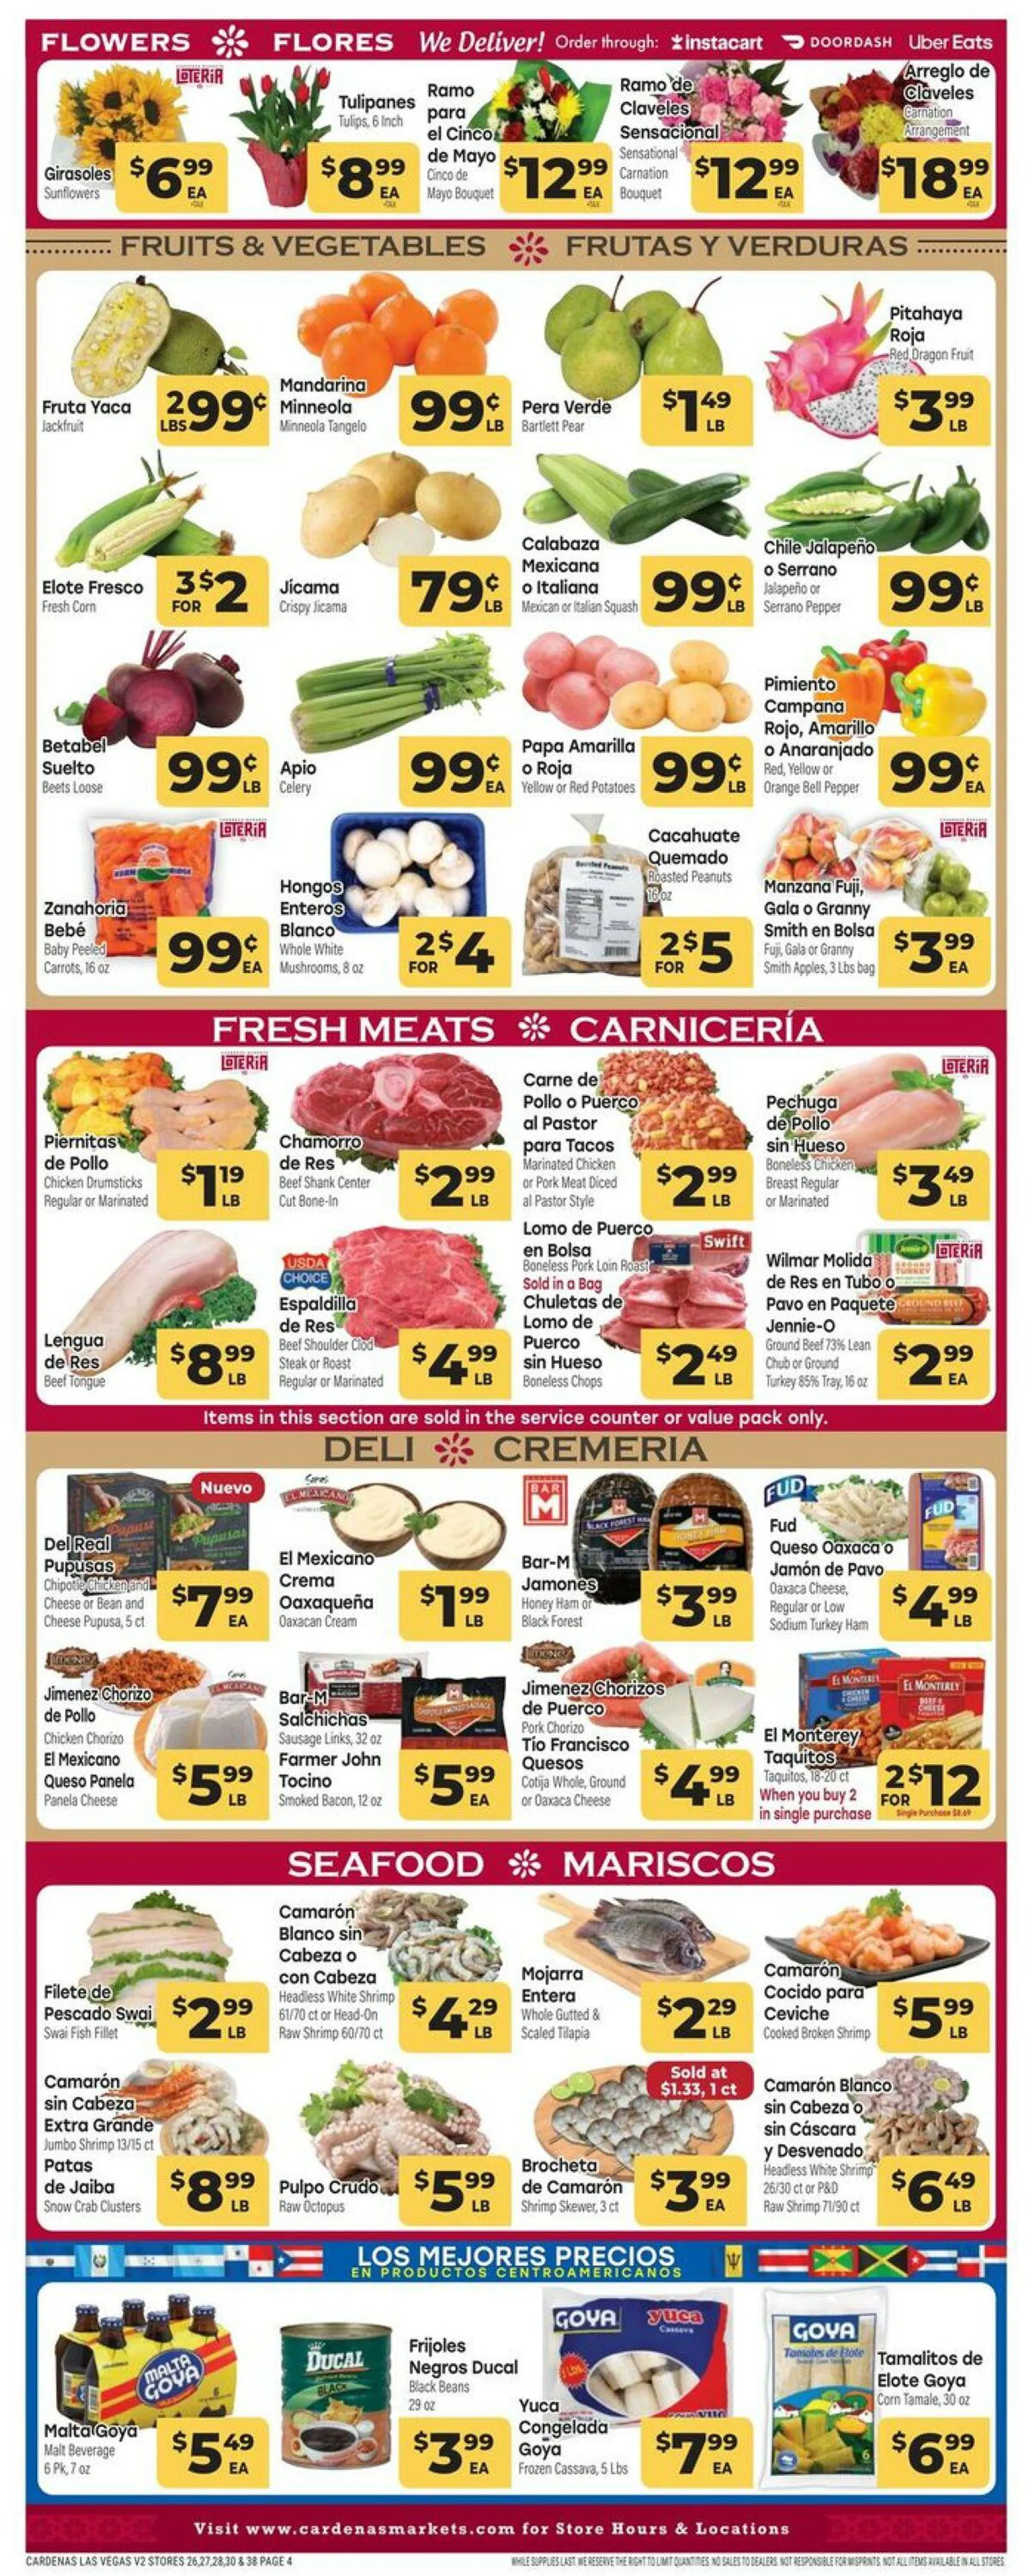 Cardenas Current weekly ad - 4